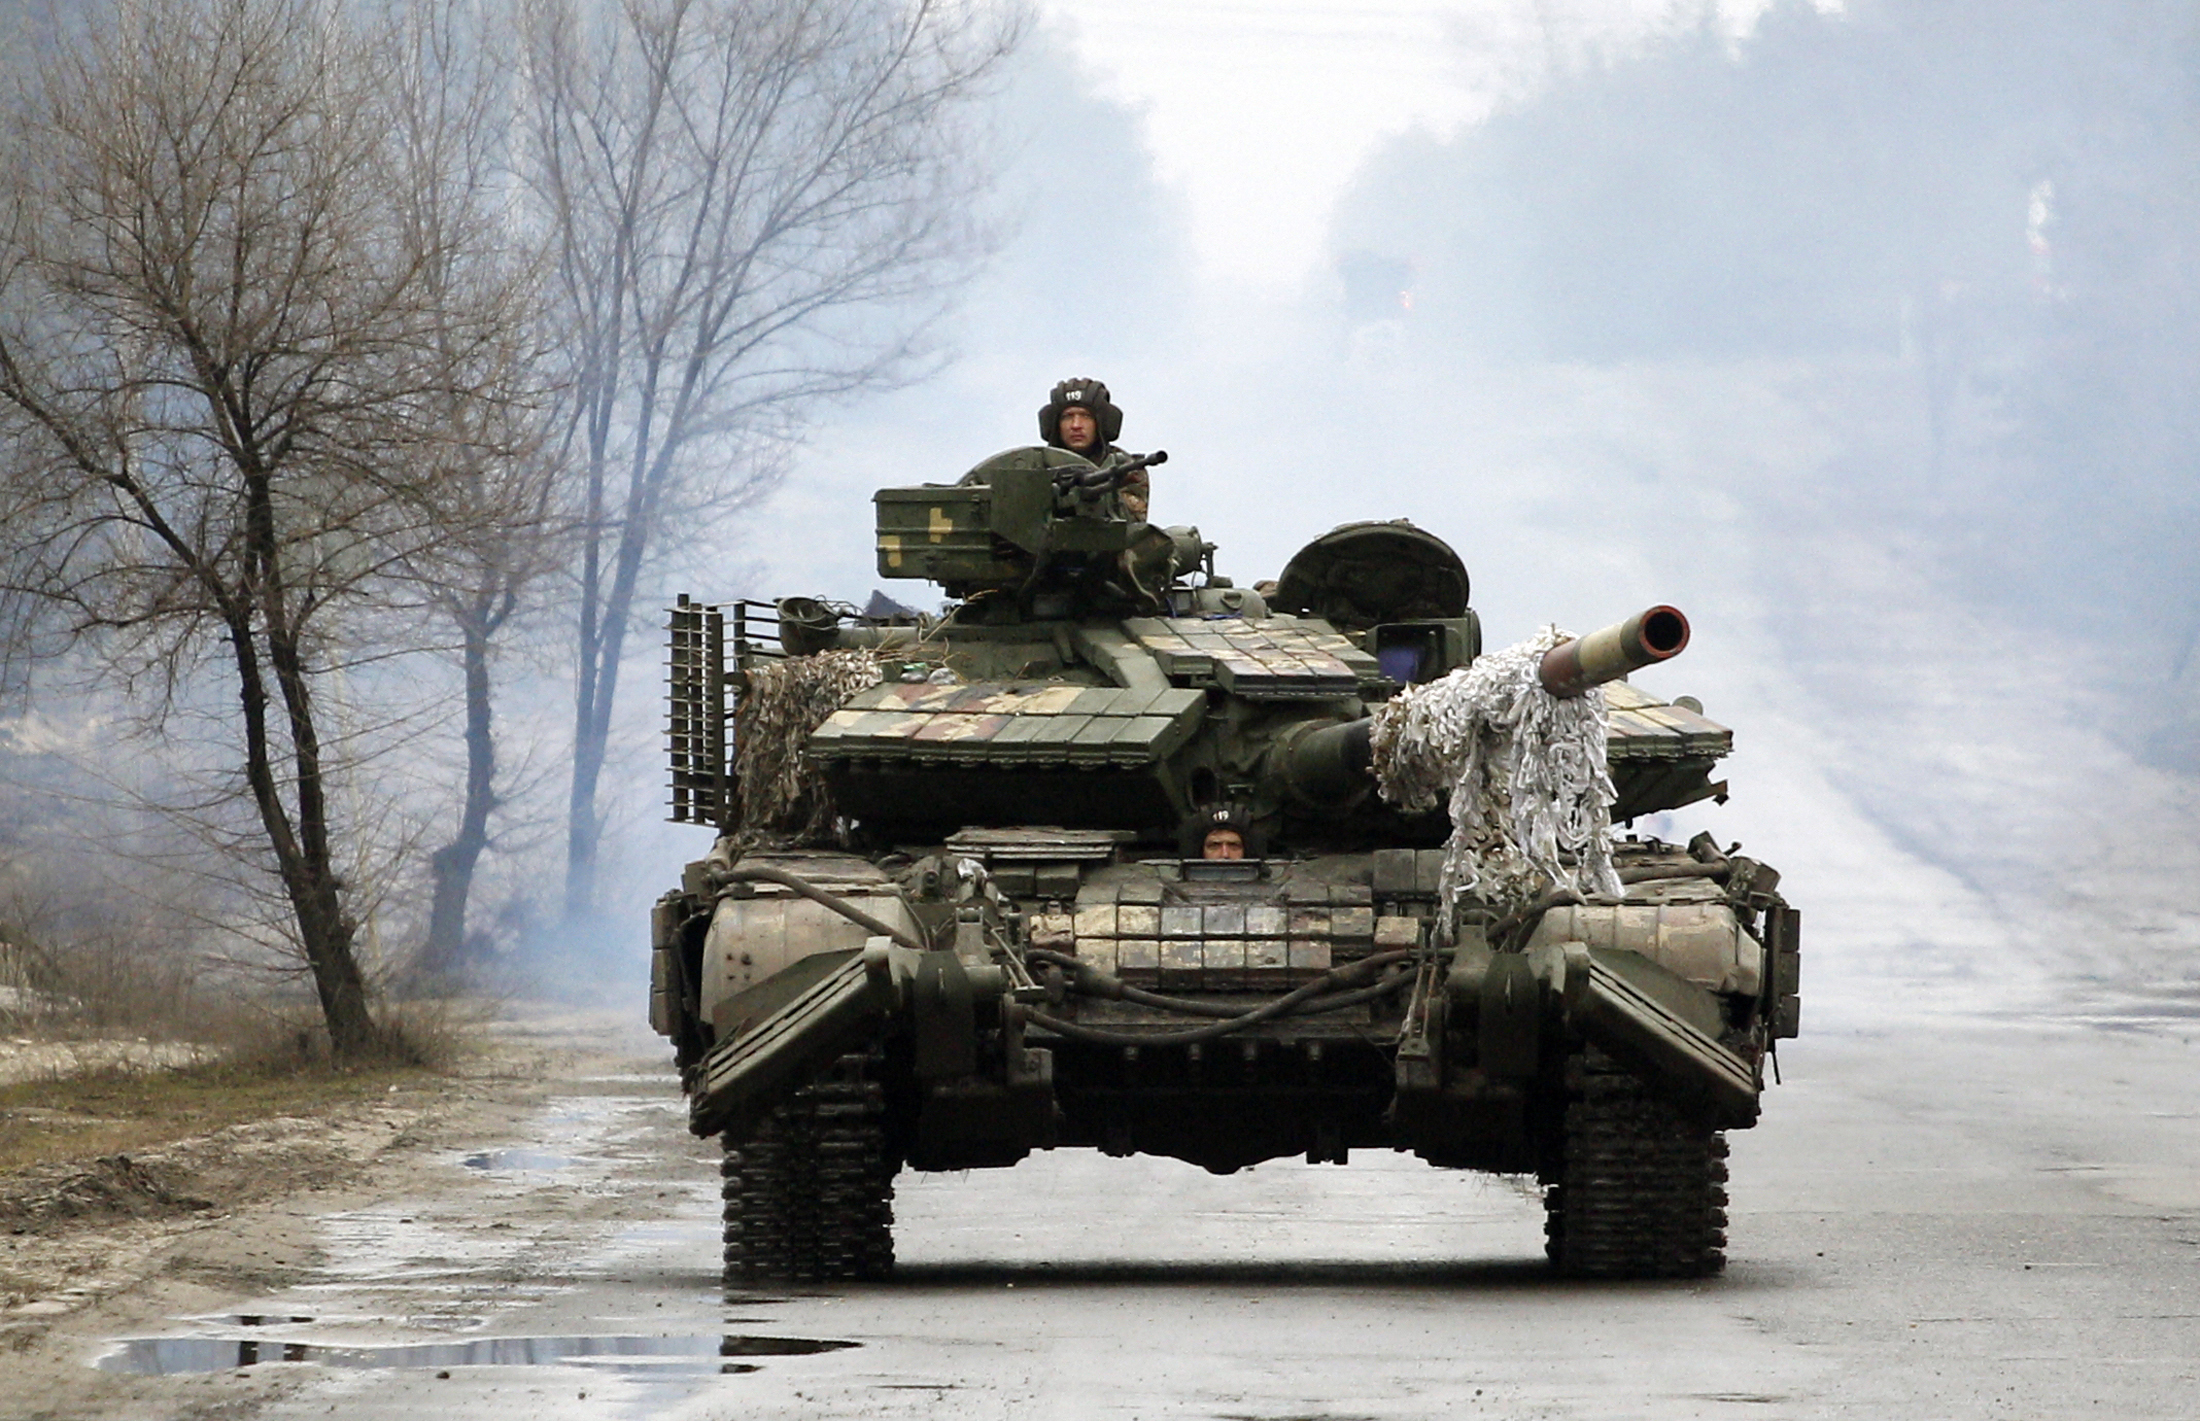 Russian Troops Grapple With Shortages Of Food, Fuel And Morale In Ukraine